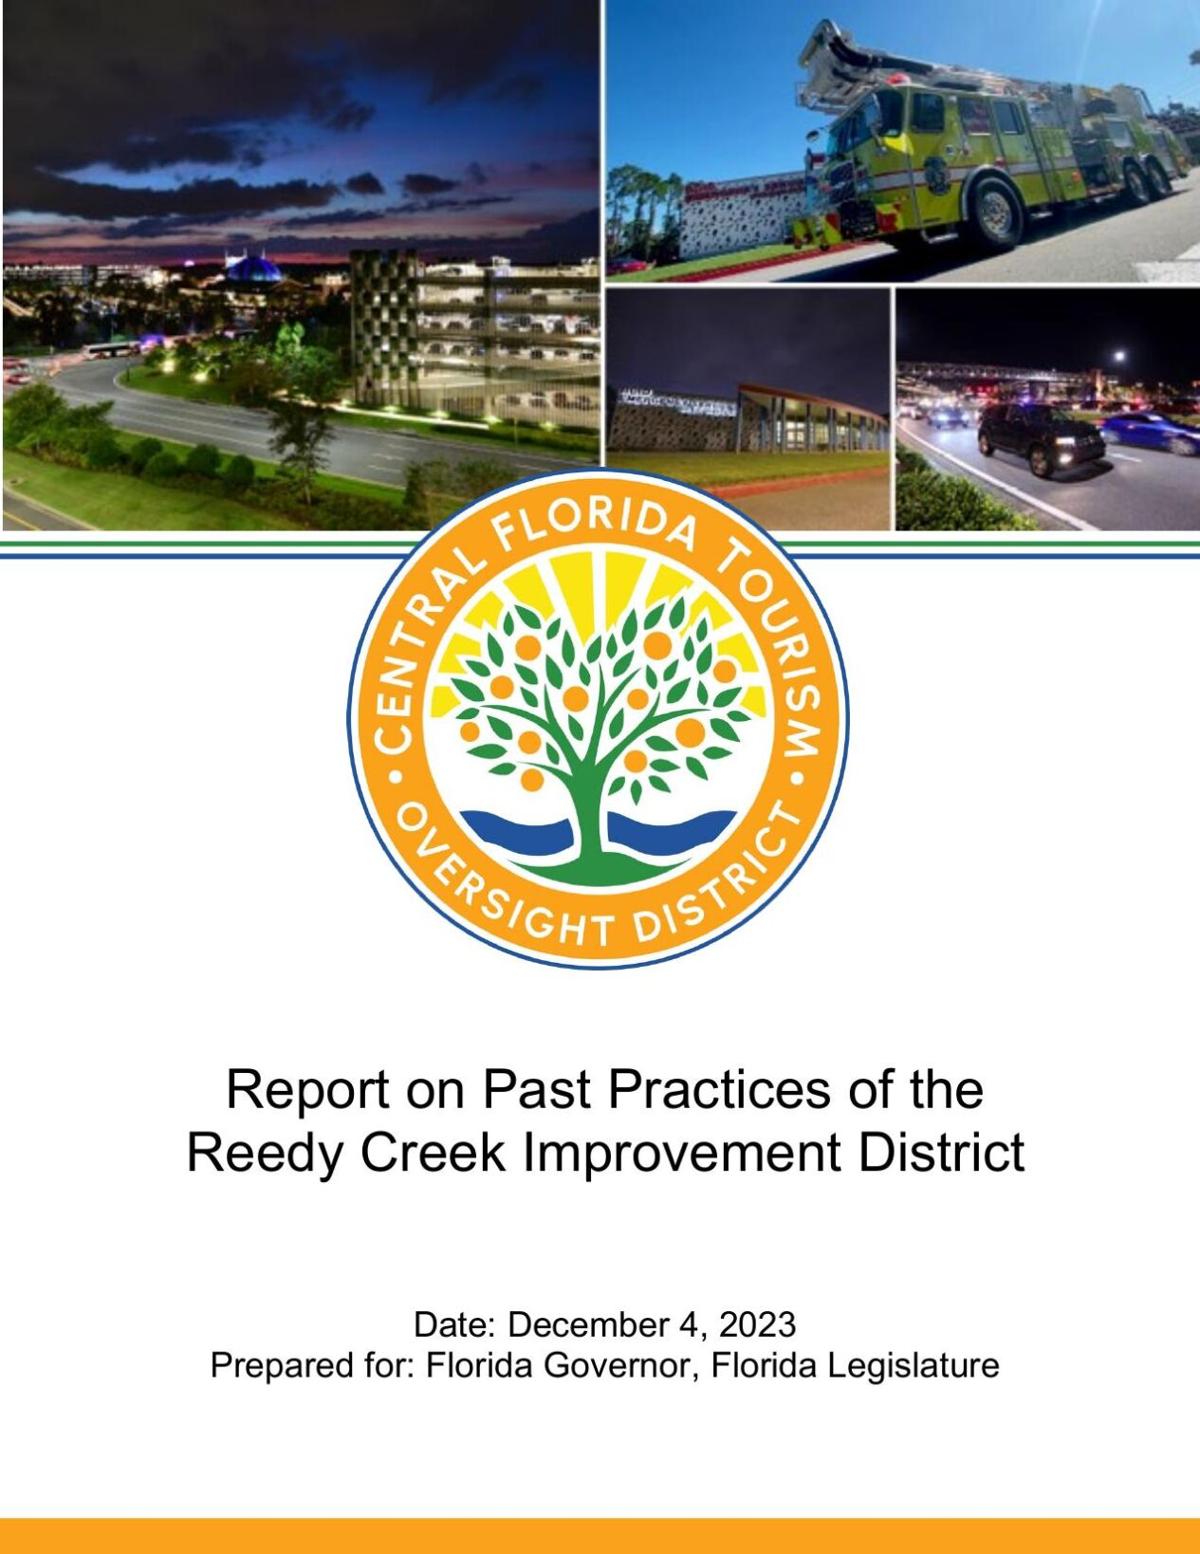 Report on Past Practices of the Reedy Creek Improvement District